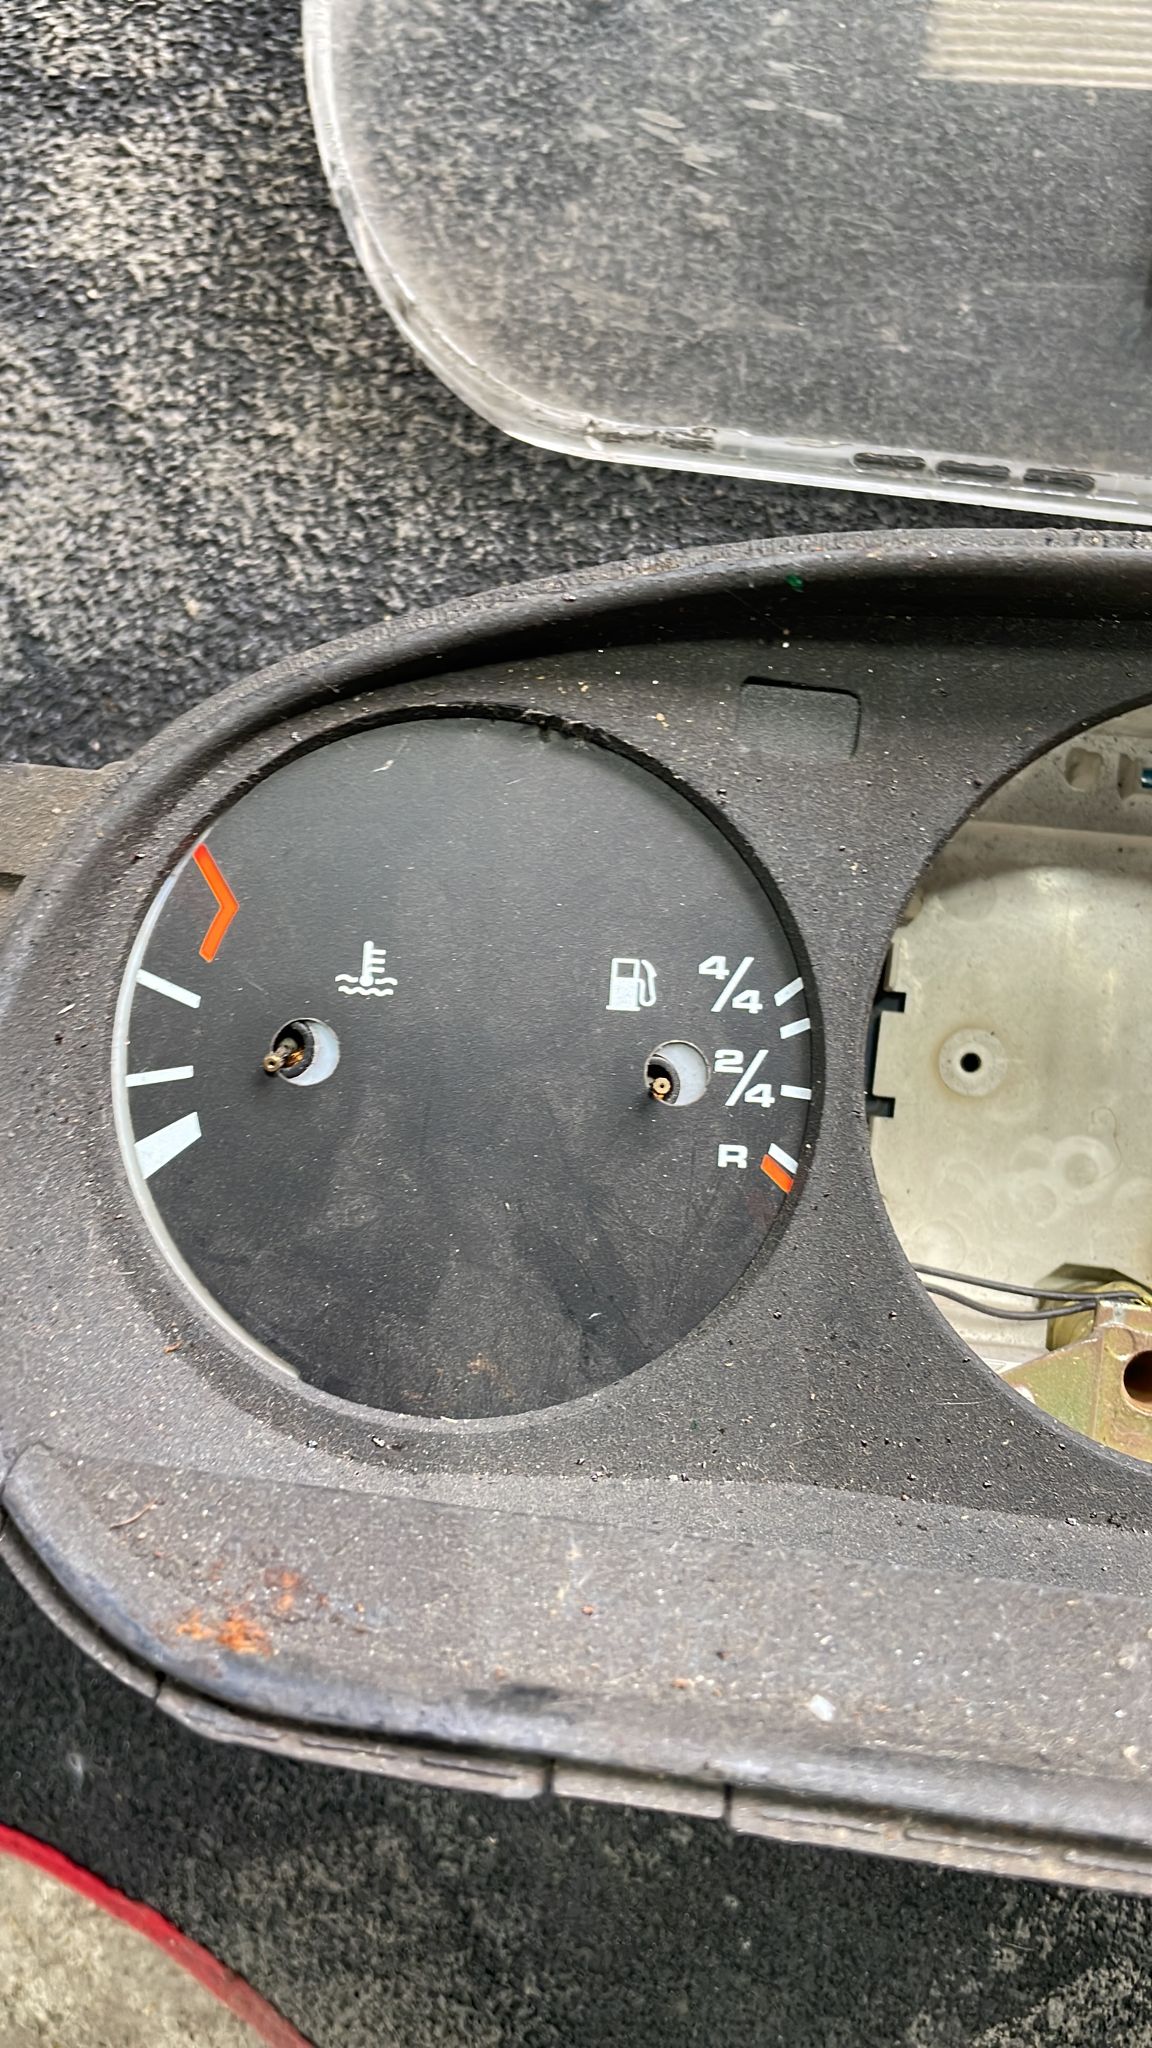 Porsche 928 Instrument cluster for spares or repair, used